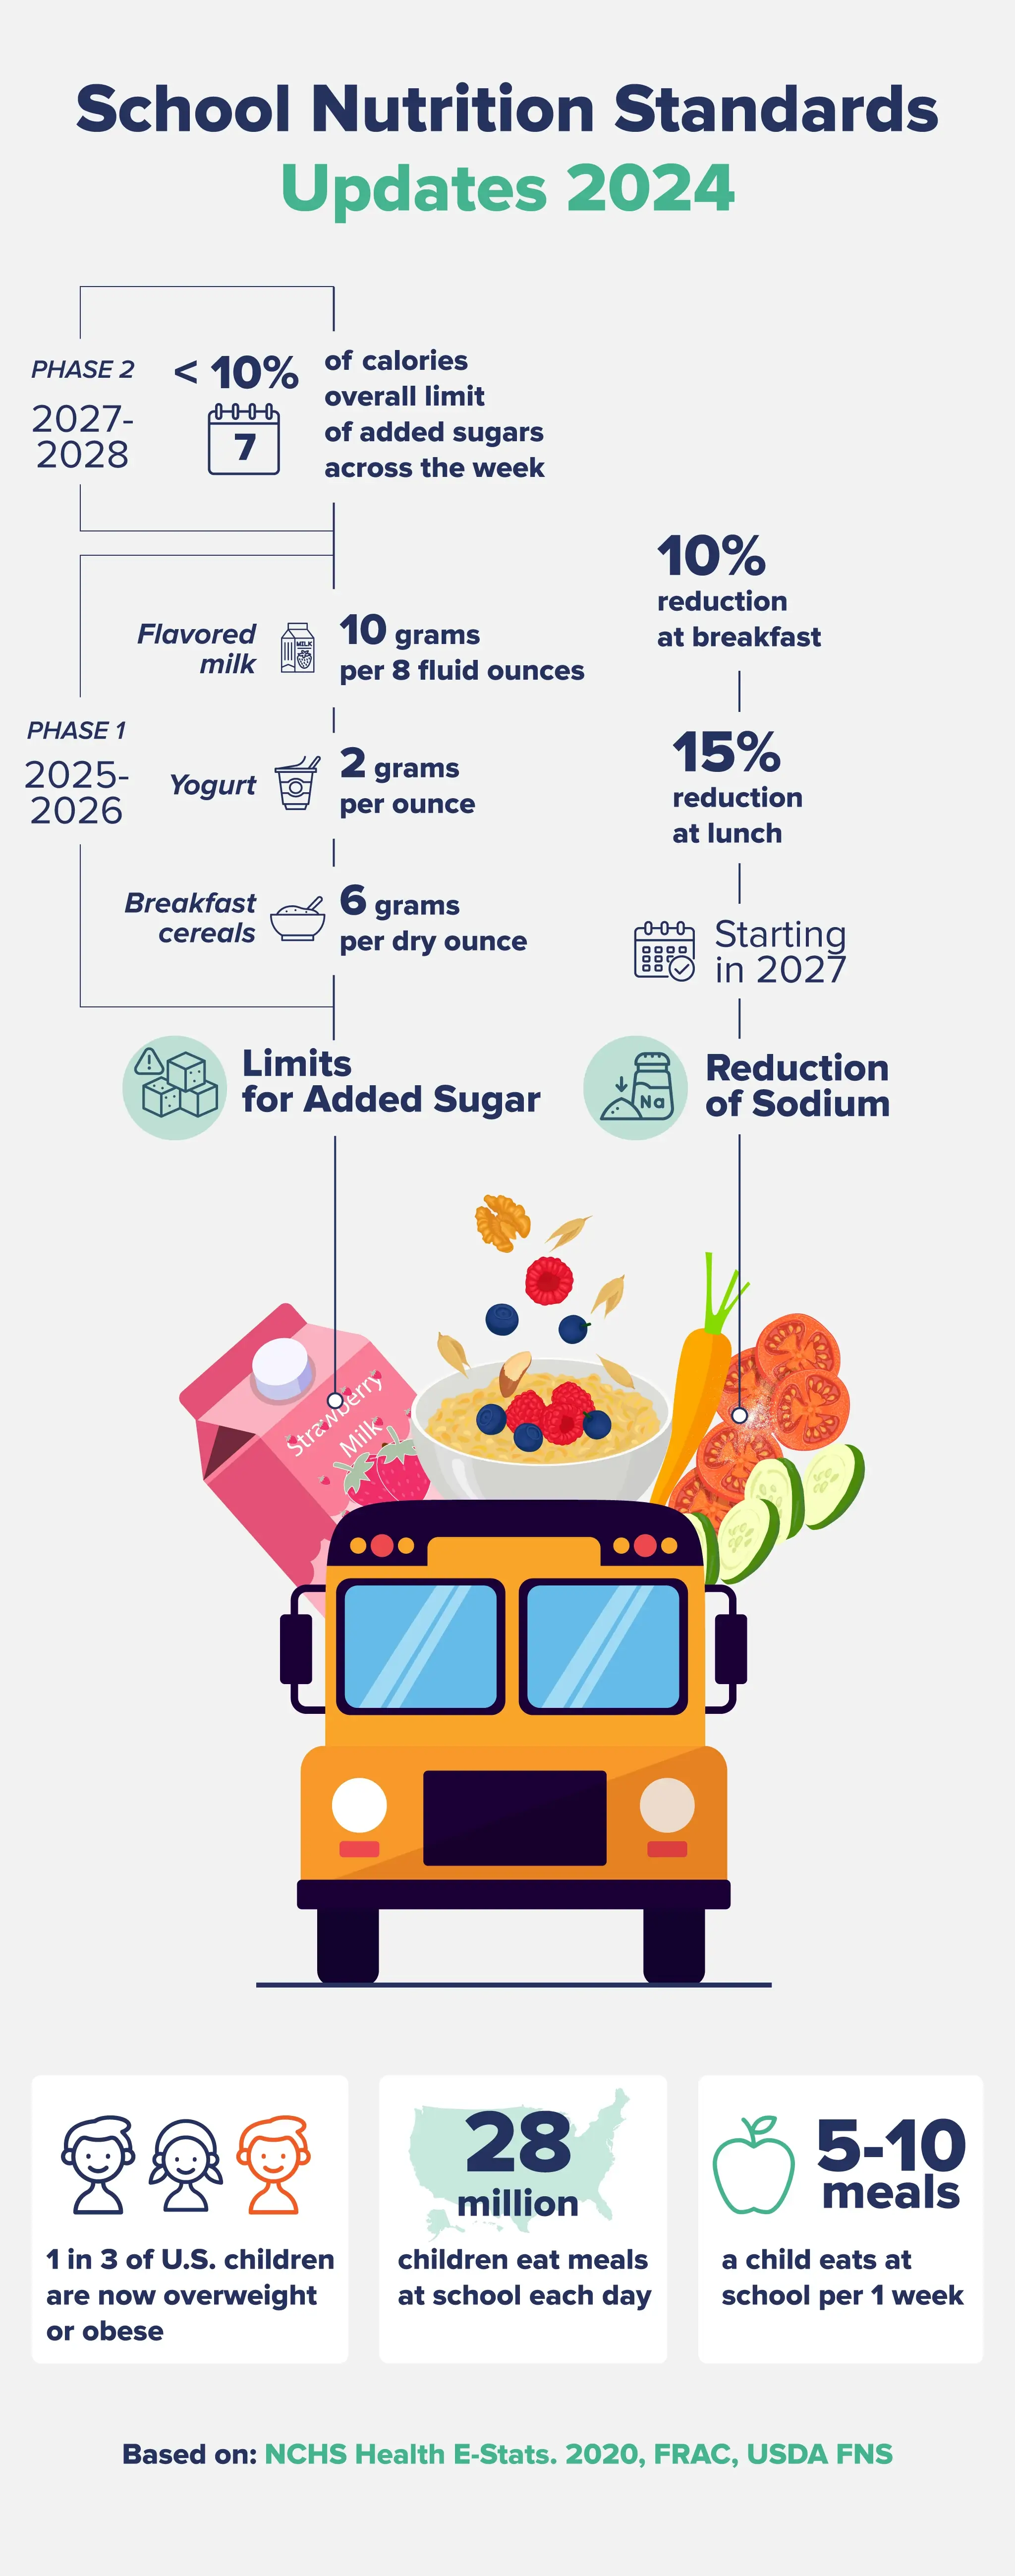 List of the U.S. Department of Agriculture (USDA) School Nutrition Standards Updates  in 2024.